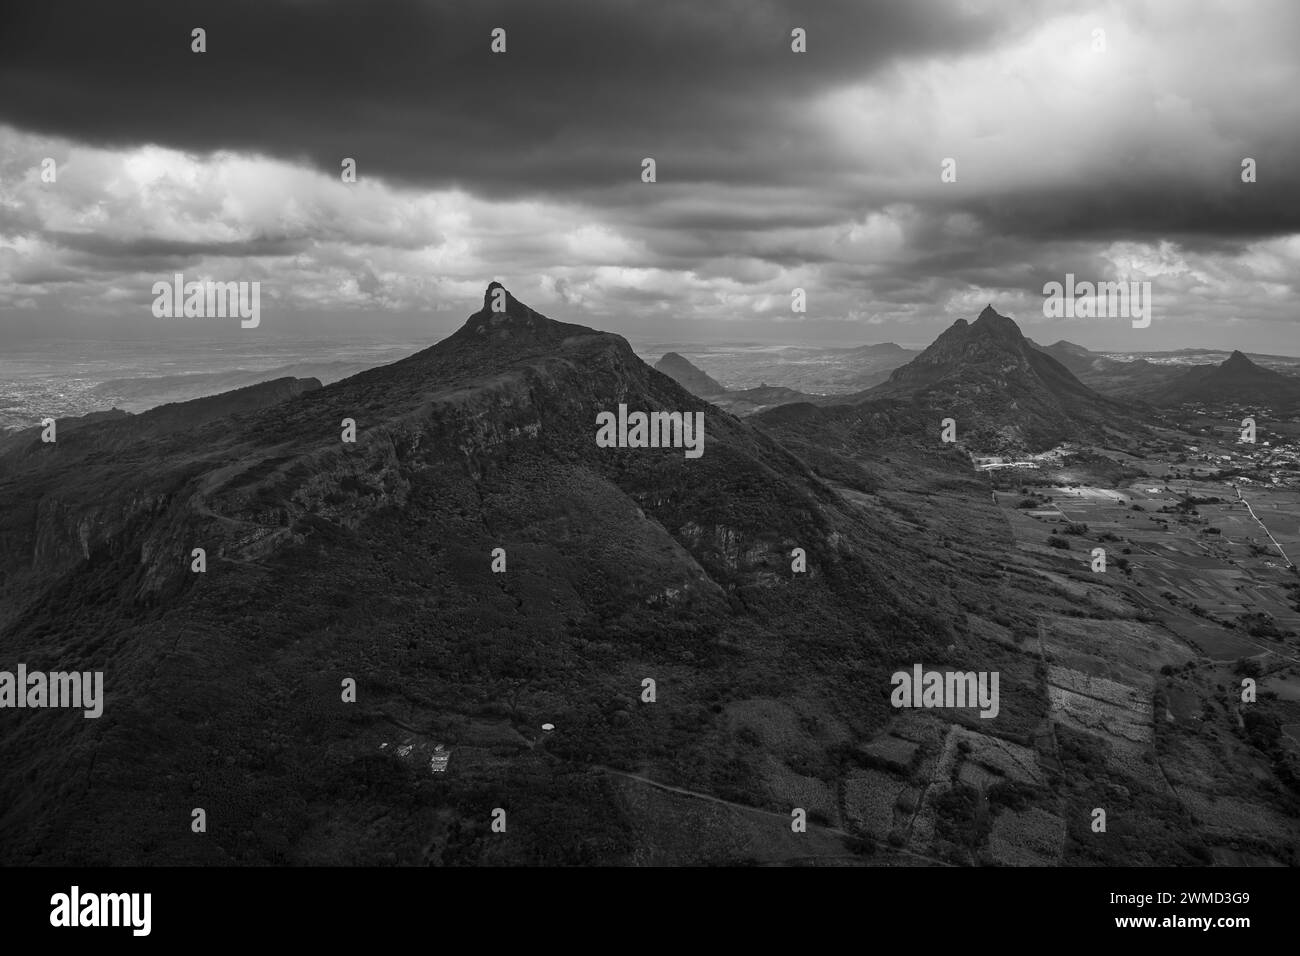 Mauritius Aerial Le Pouce Mountain Peak in the Moka Range with Storm Clouds Black and White Landscape Stock Photo